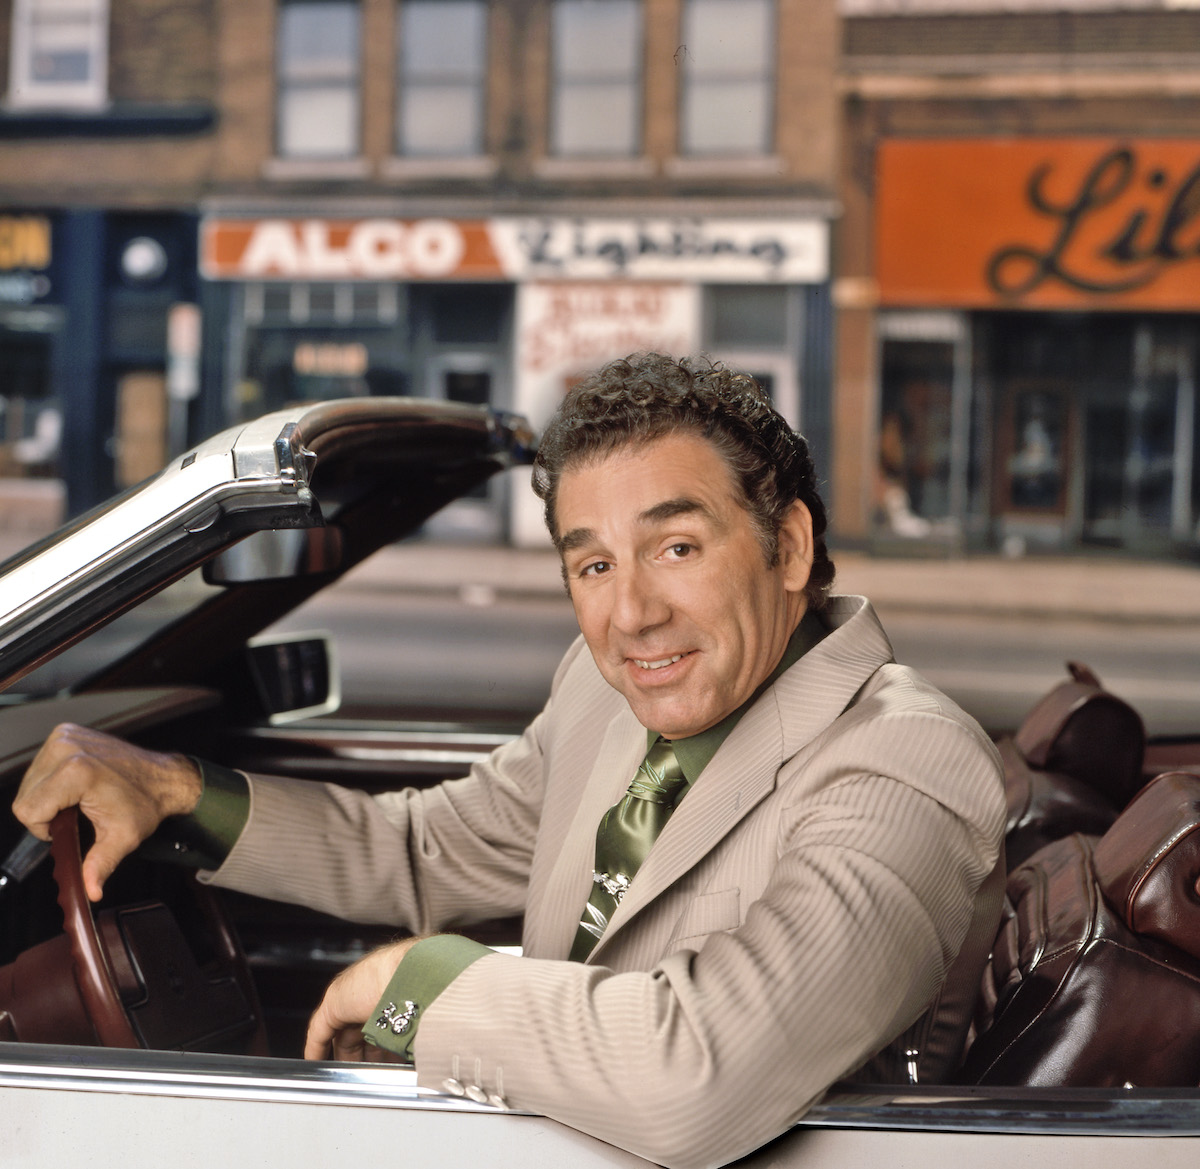 Kramer actor Michael Richards in a portrait session in 2000. Kramer seinfeld was his most iconic role. 